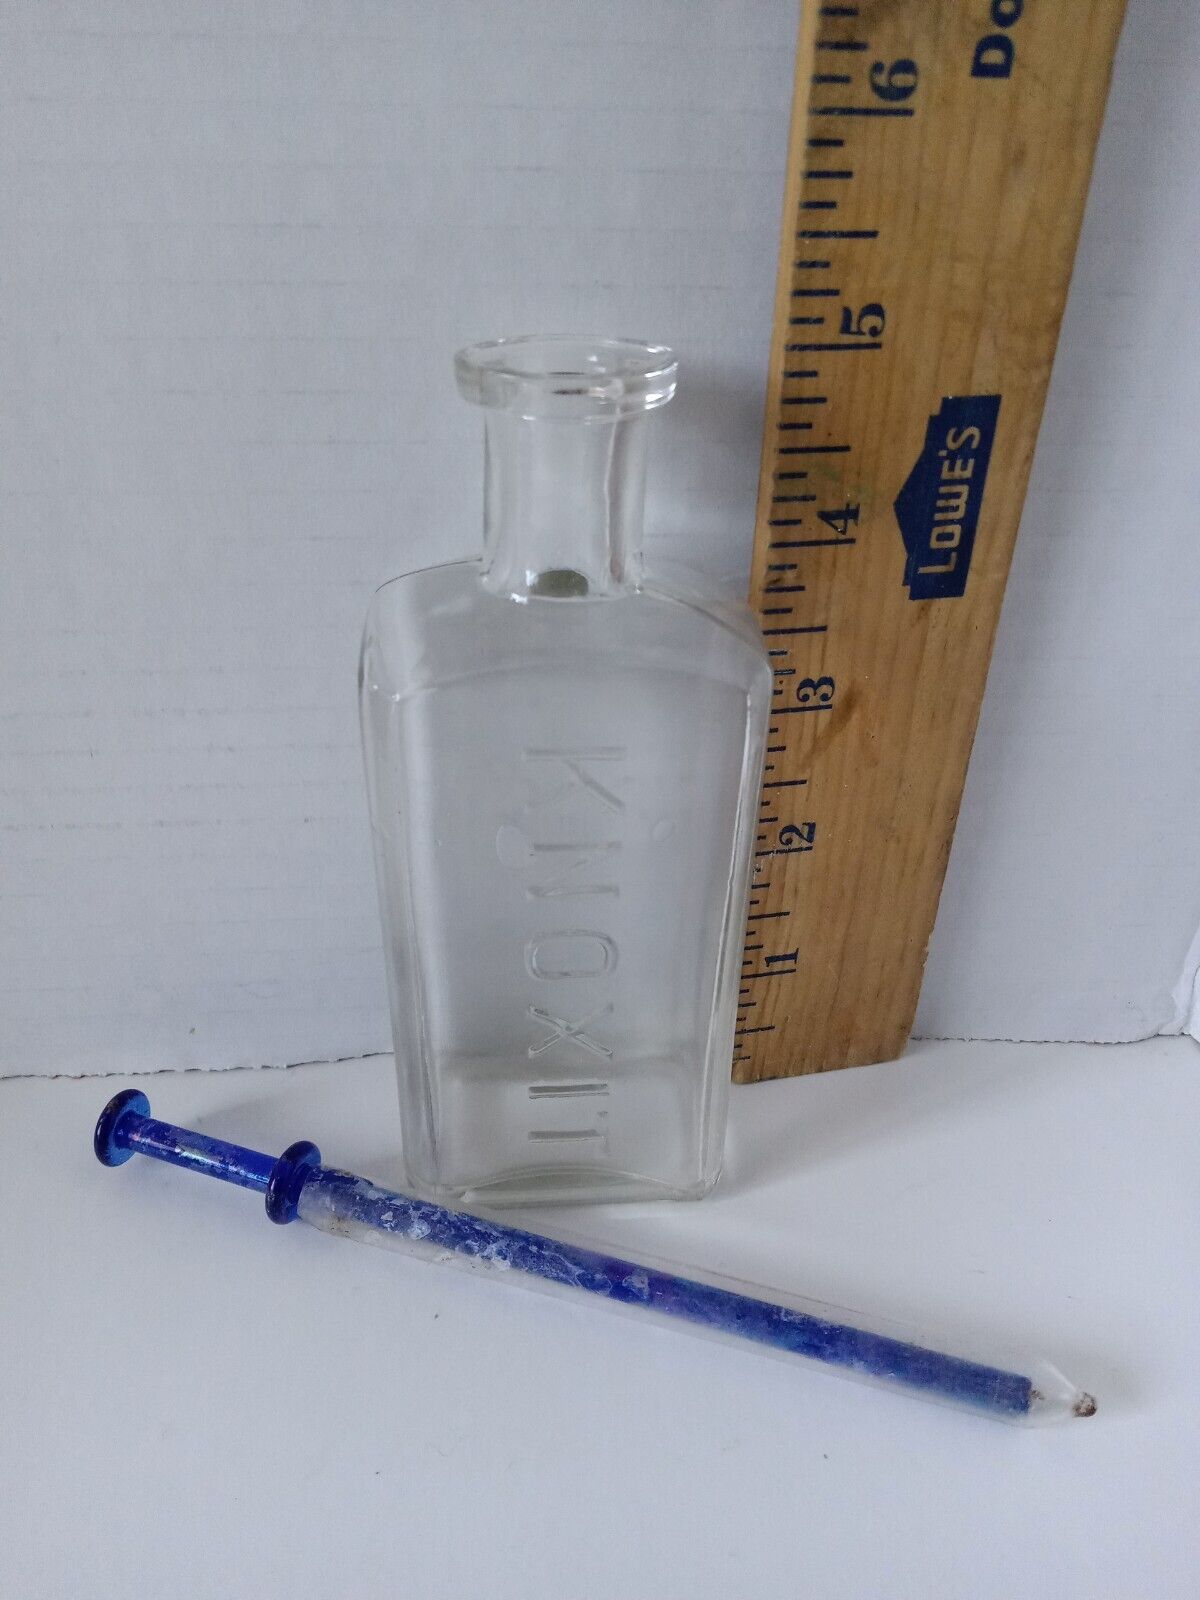 KNOXIT The syphilis and VD cure bottle w/stringe